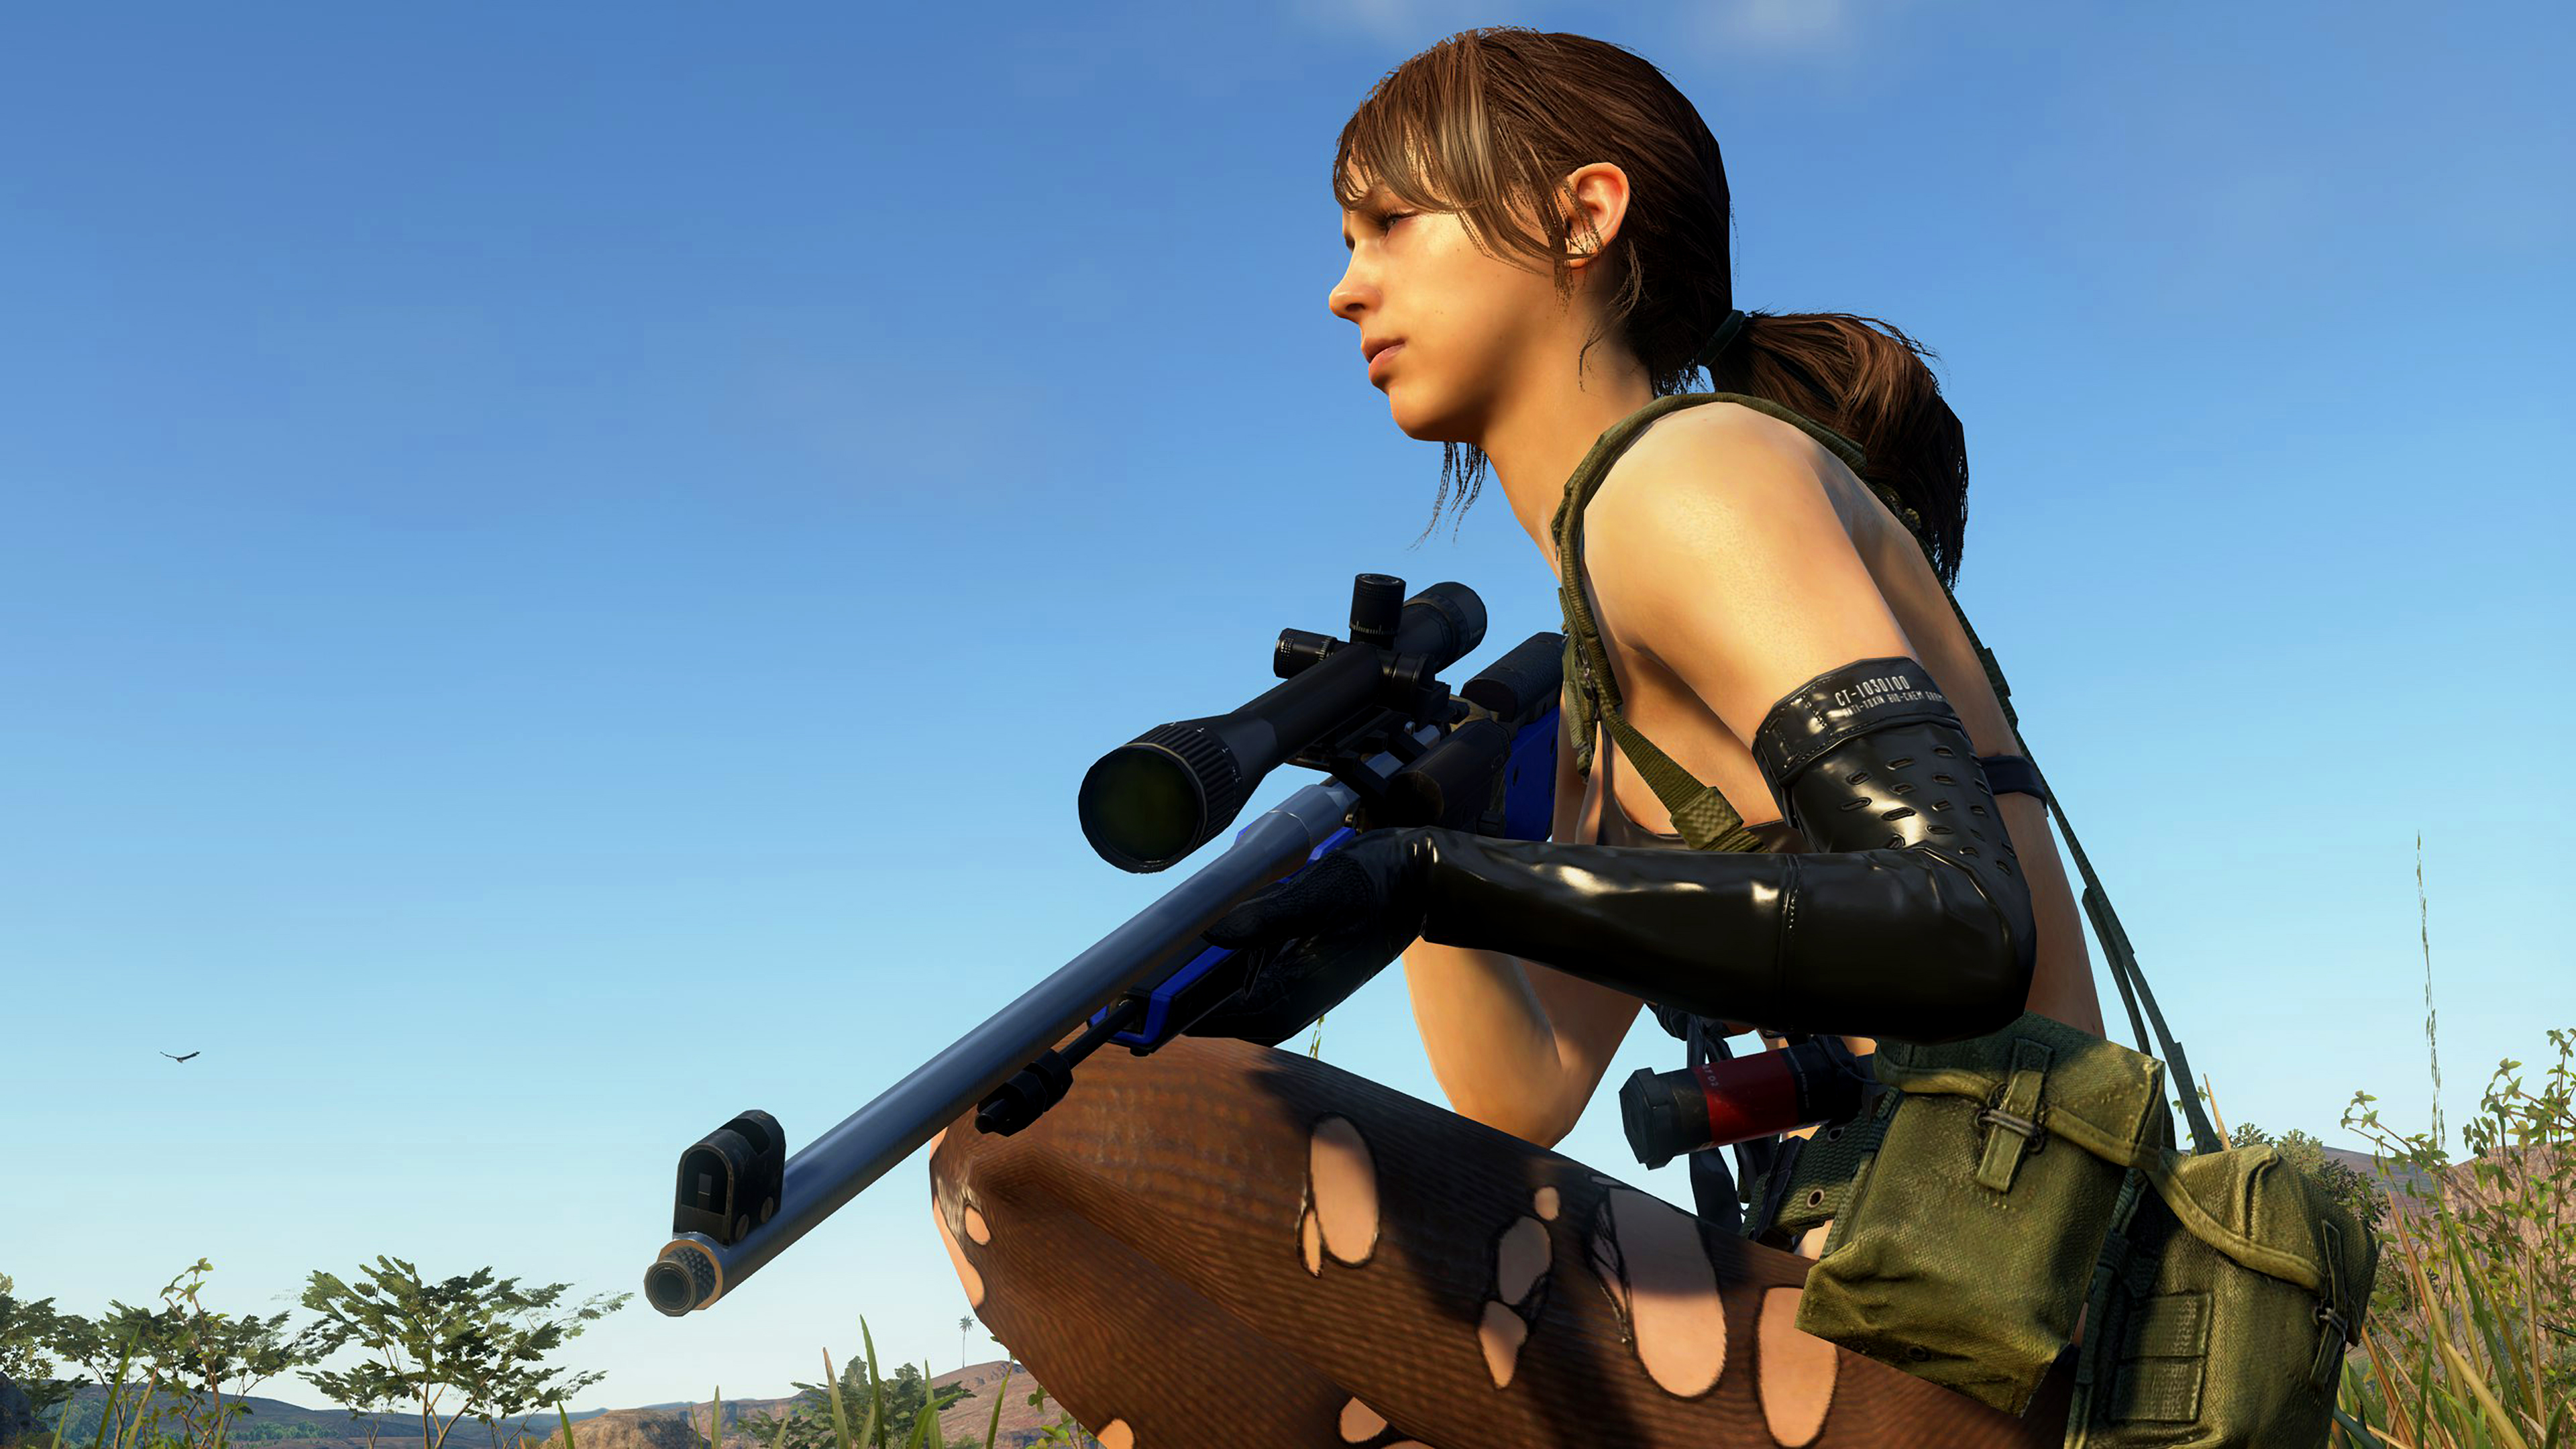 Metal Gear Solid V The Phantom Pain Quiet Screen Shot Low Angle 3840x2160